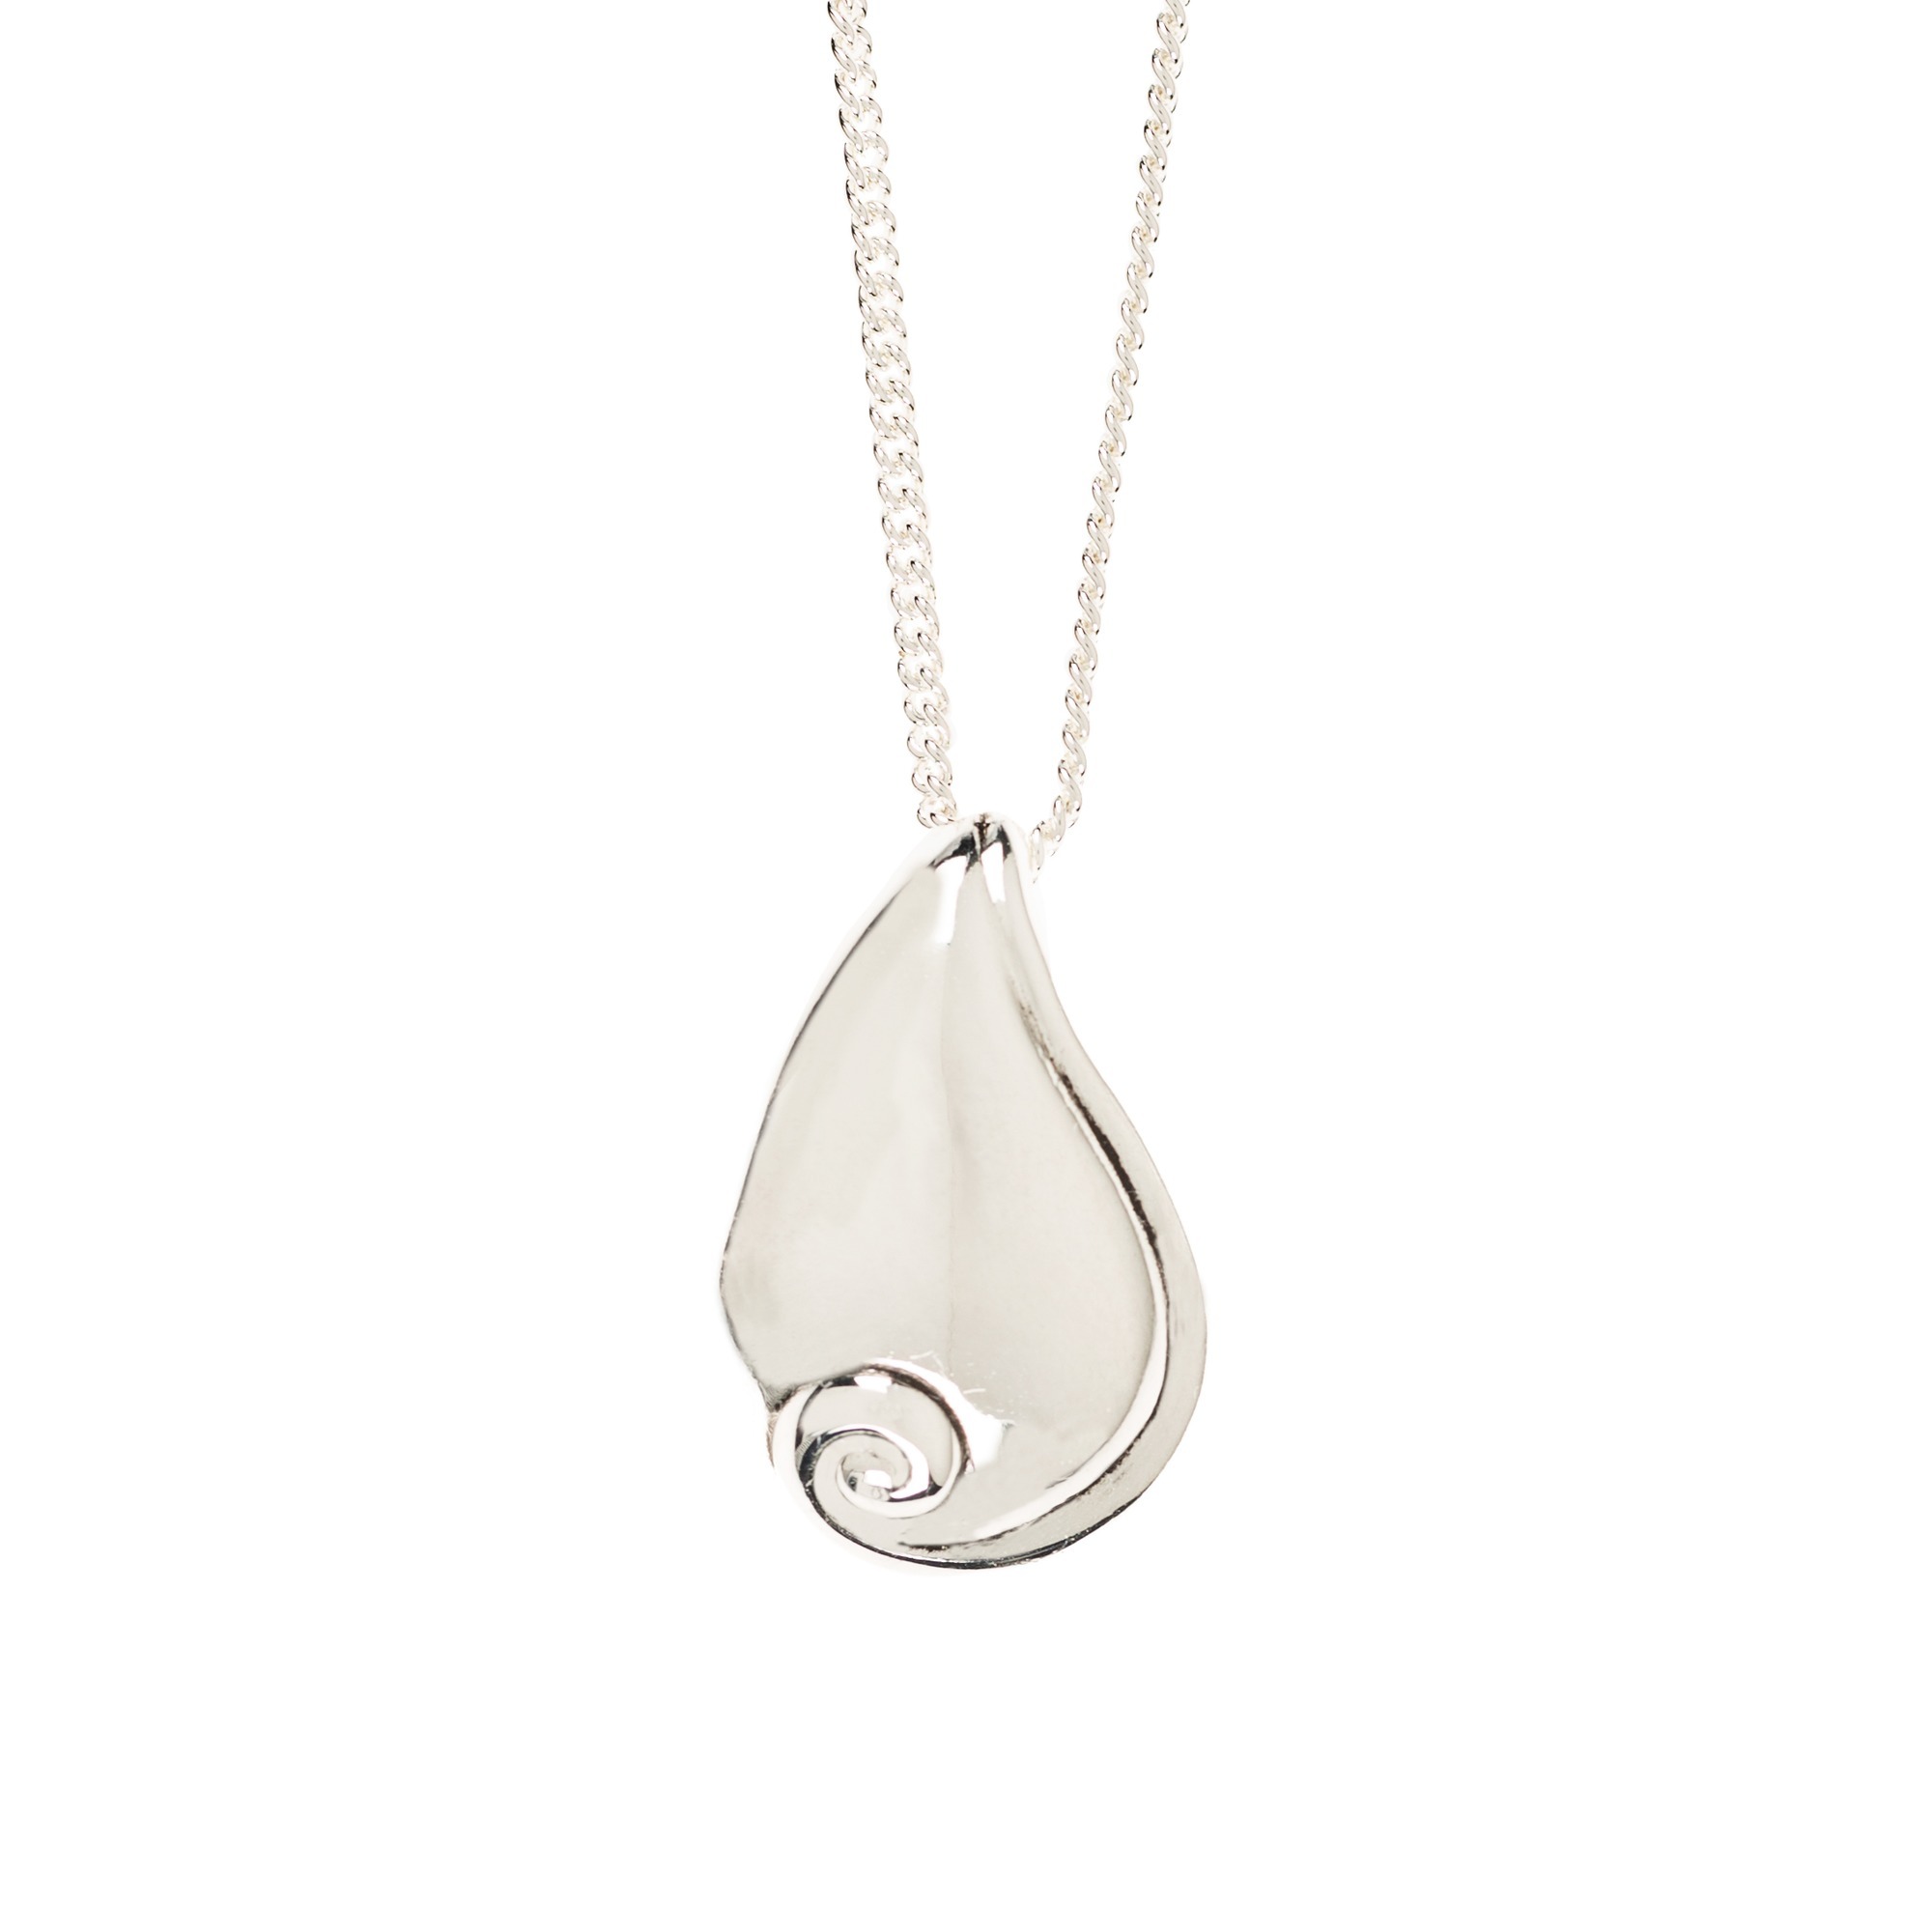 Sterling Silver Teardrop Memorial Necklace | The Catholic Company®